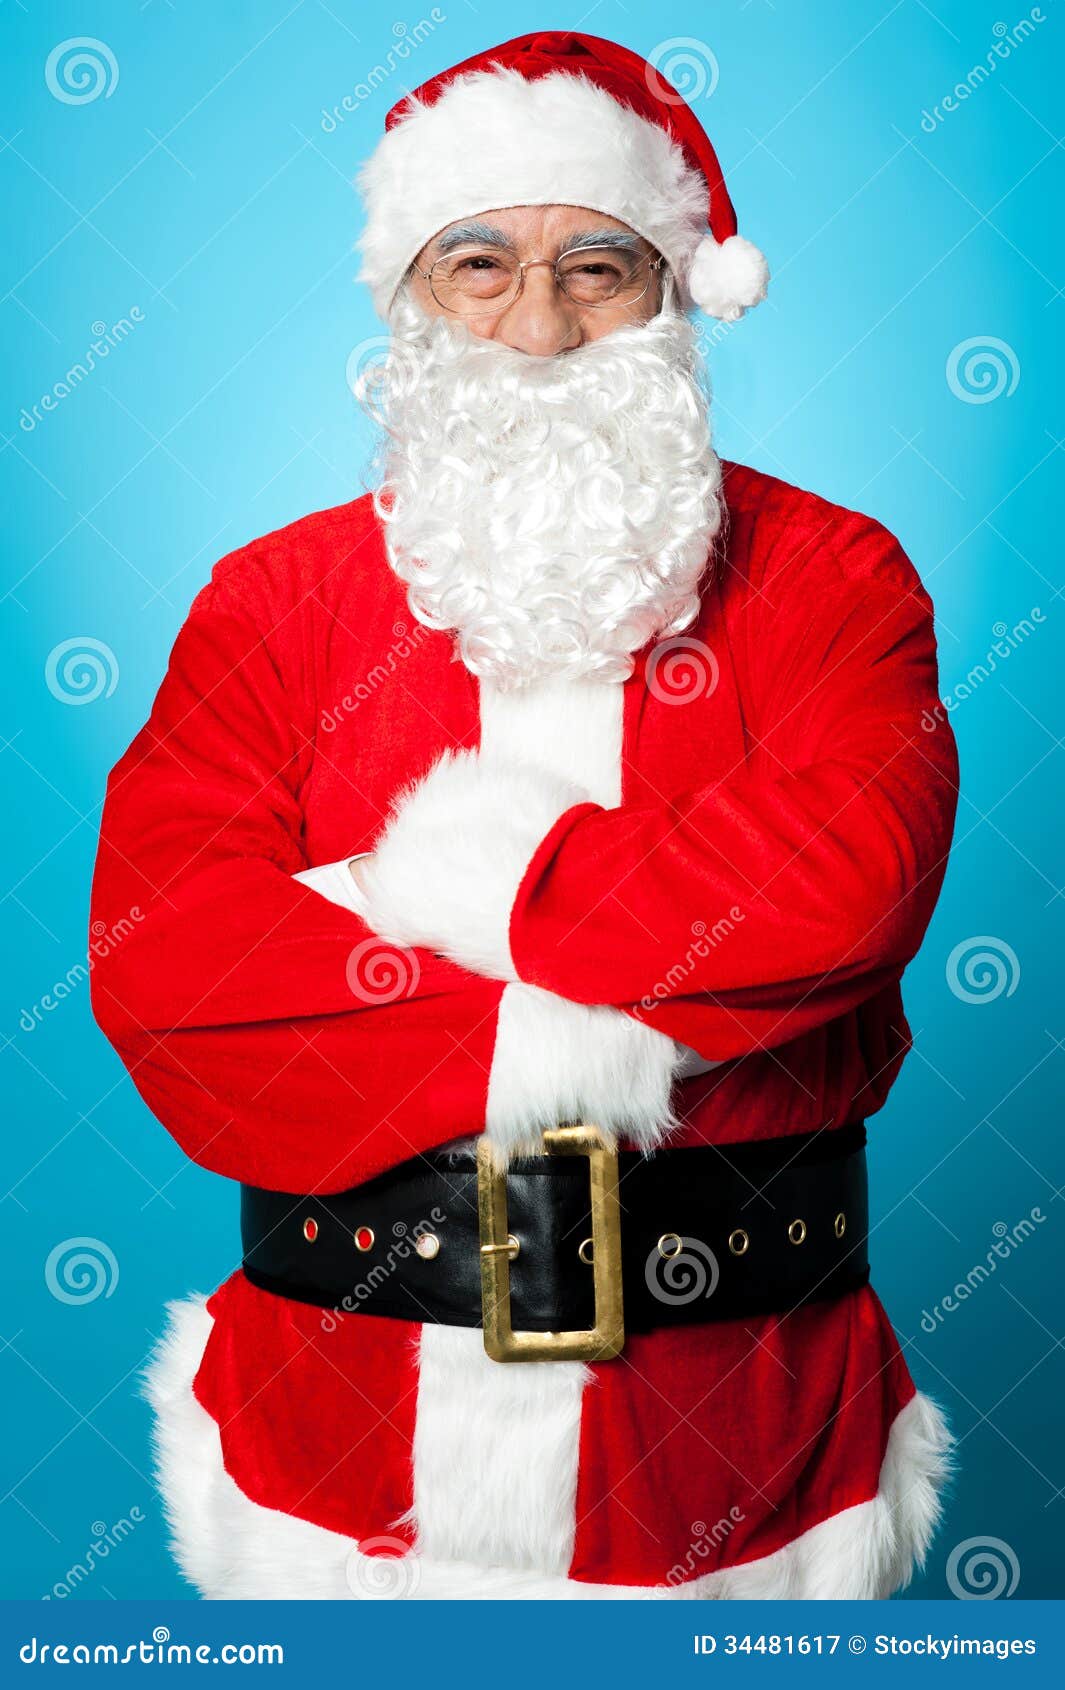 Santa Claus Posing with Confidence Stock Image - Image of noel ...